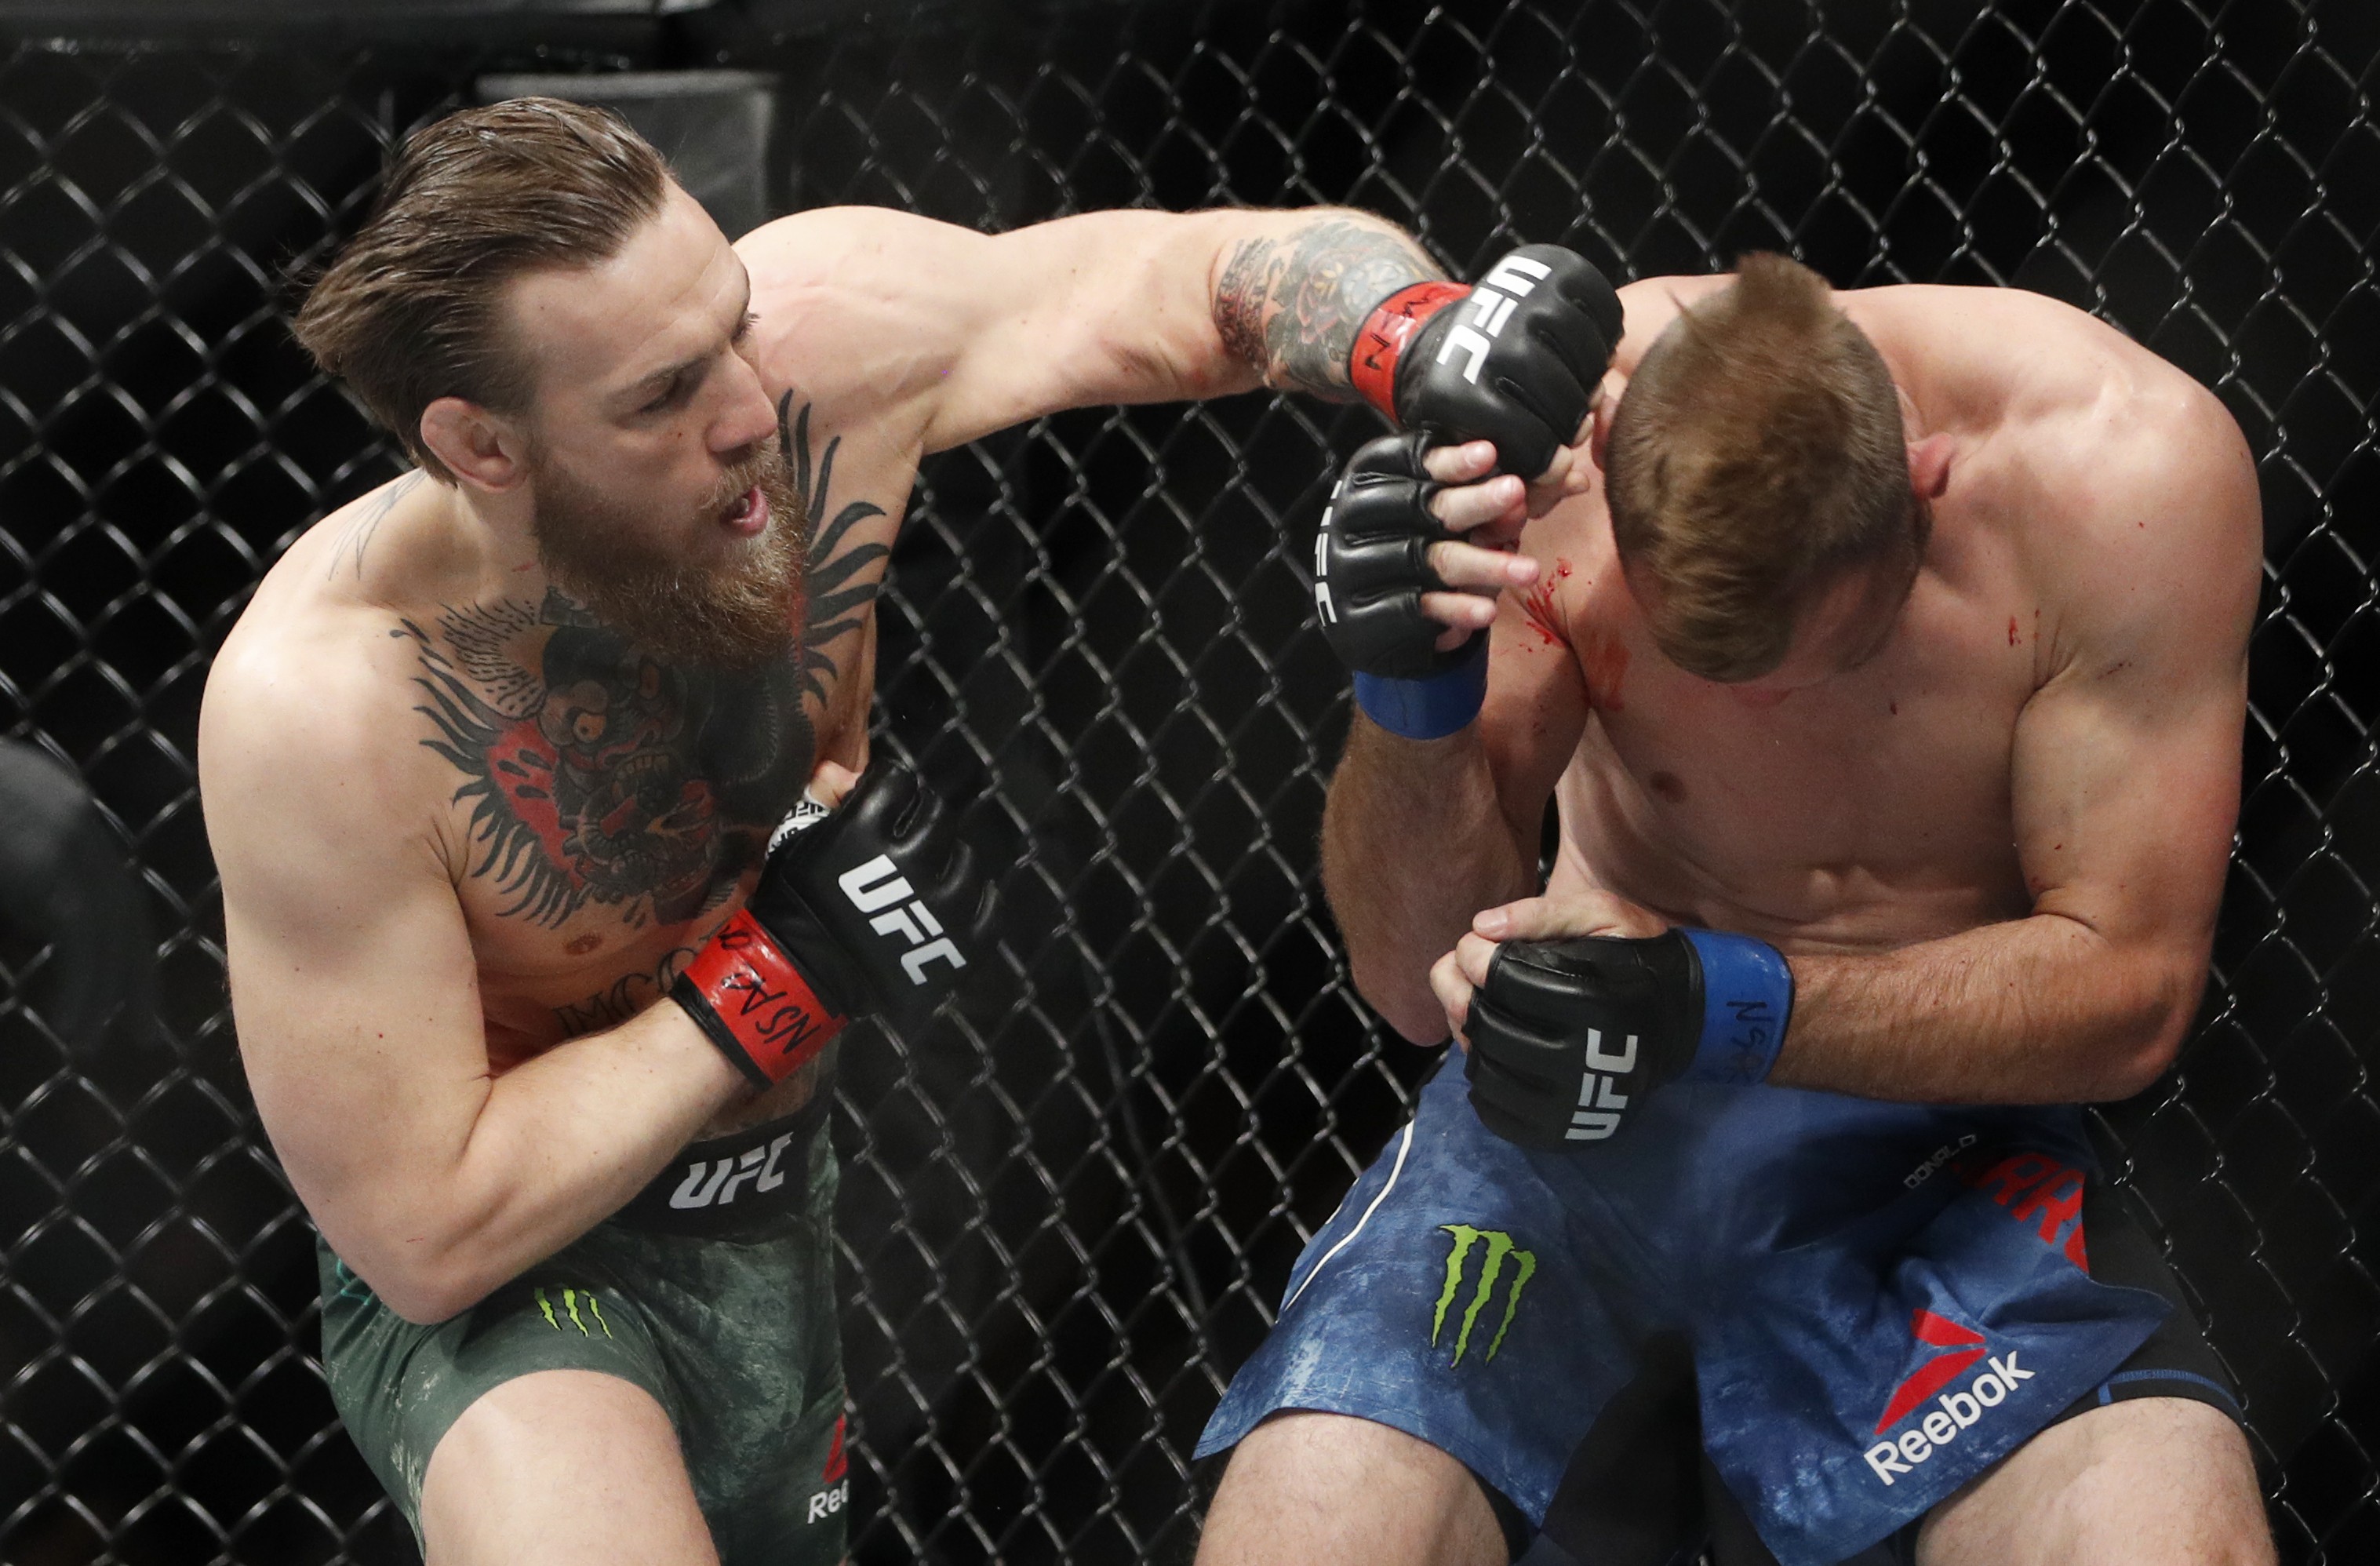 Conor McGregor hits Donald "Cowboy" Cerrone during their UFC 246 main event bout in Las Vegas. Photo: AP